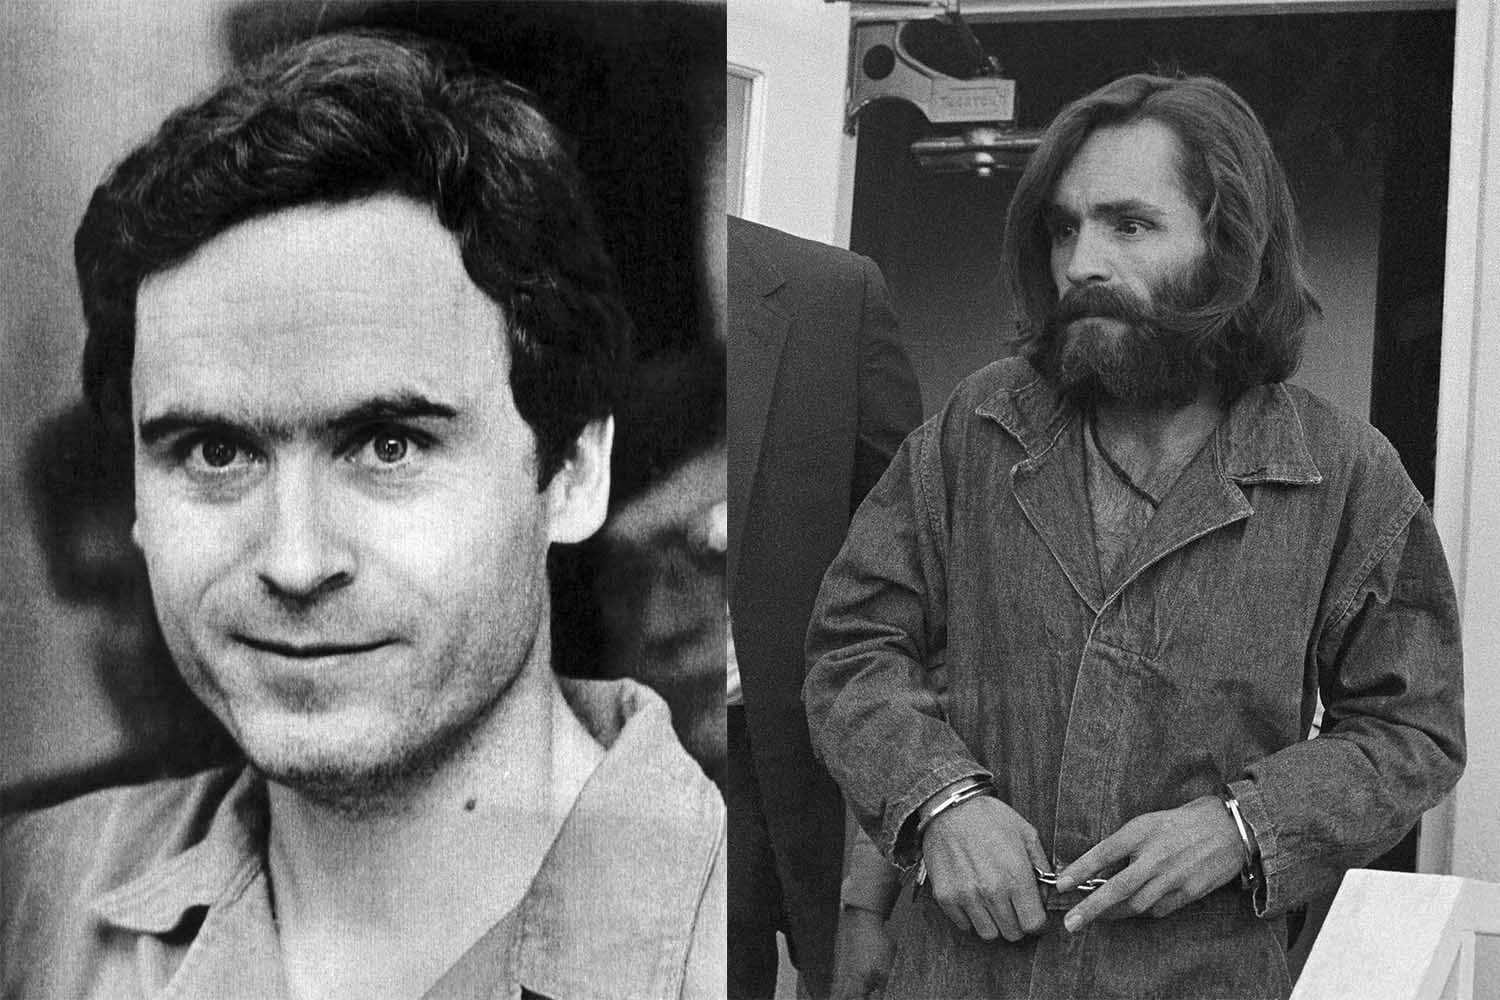 Fans of Ted Bundy and Charles Manson get into Twitter Feud